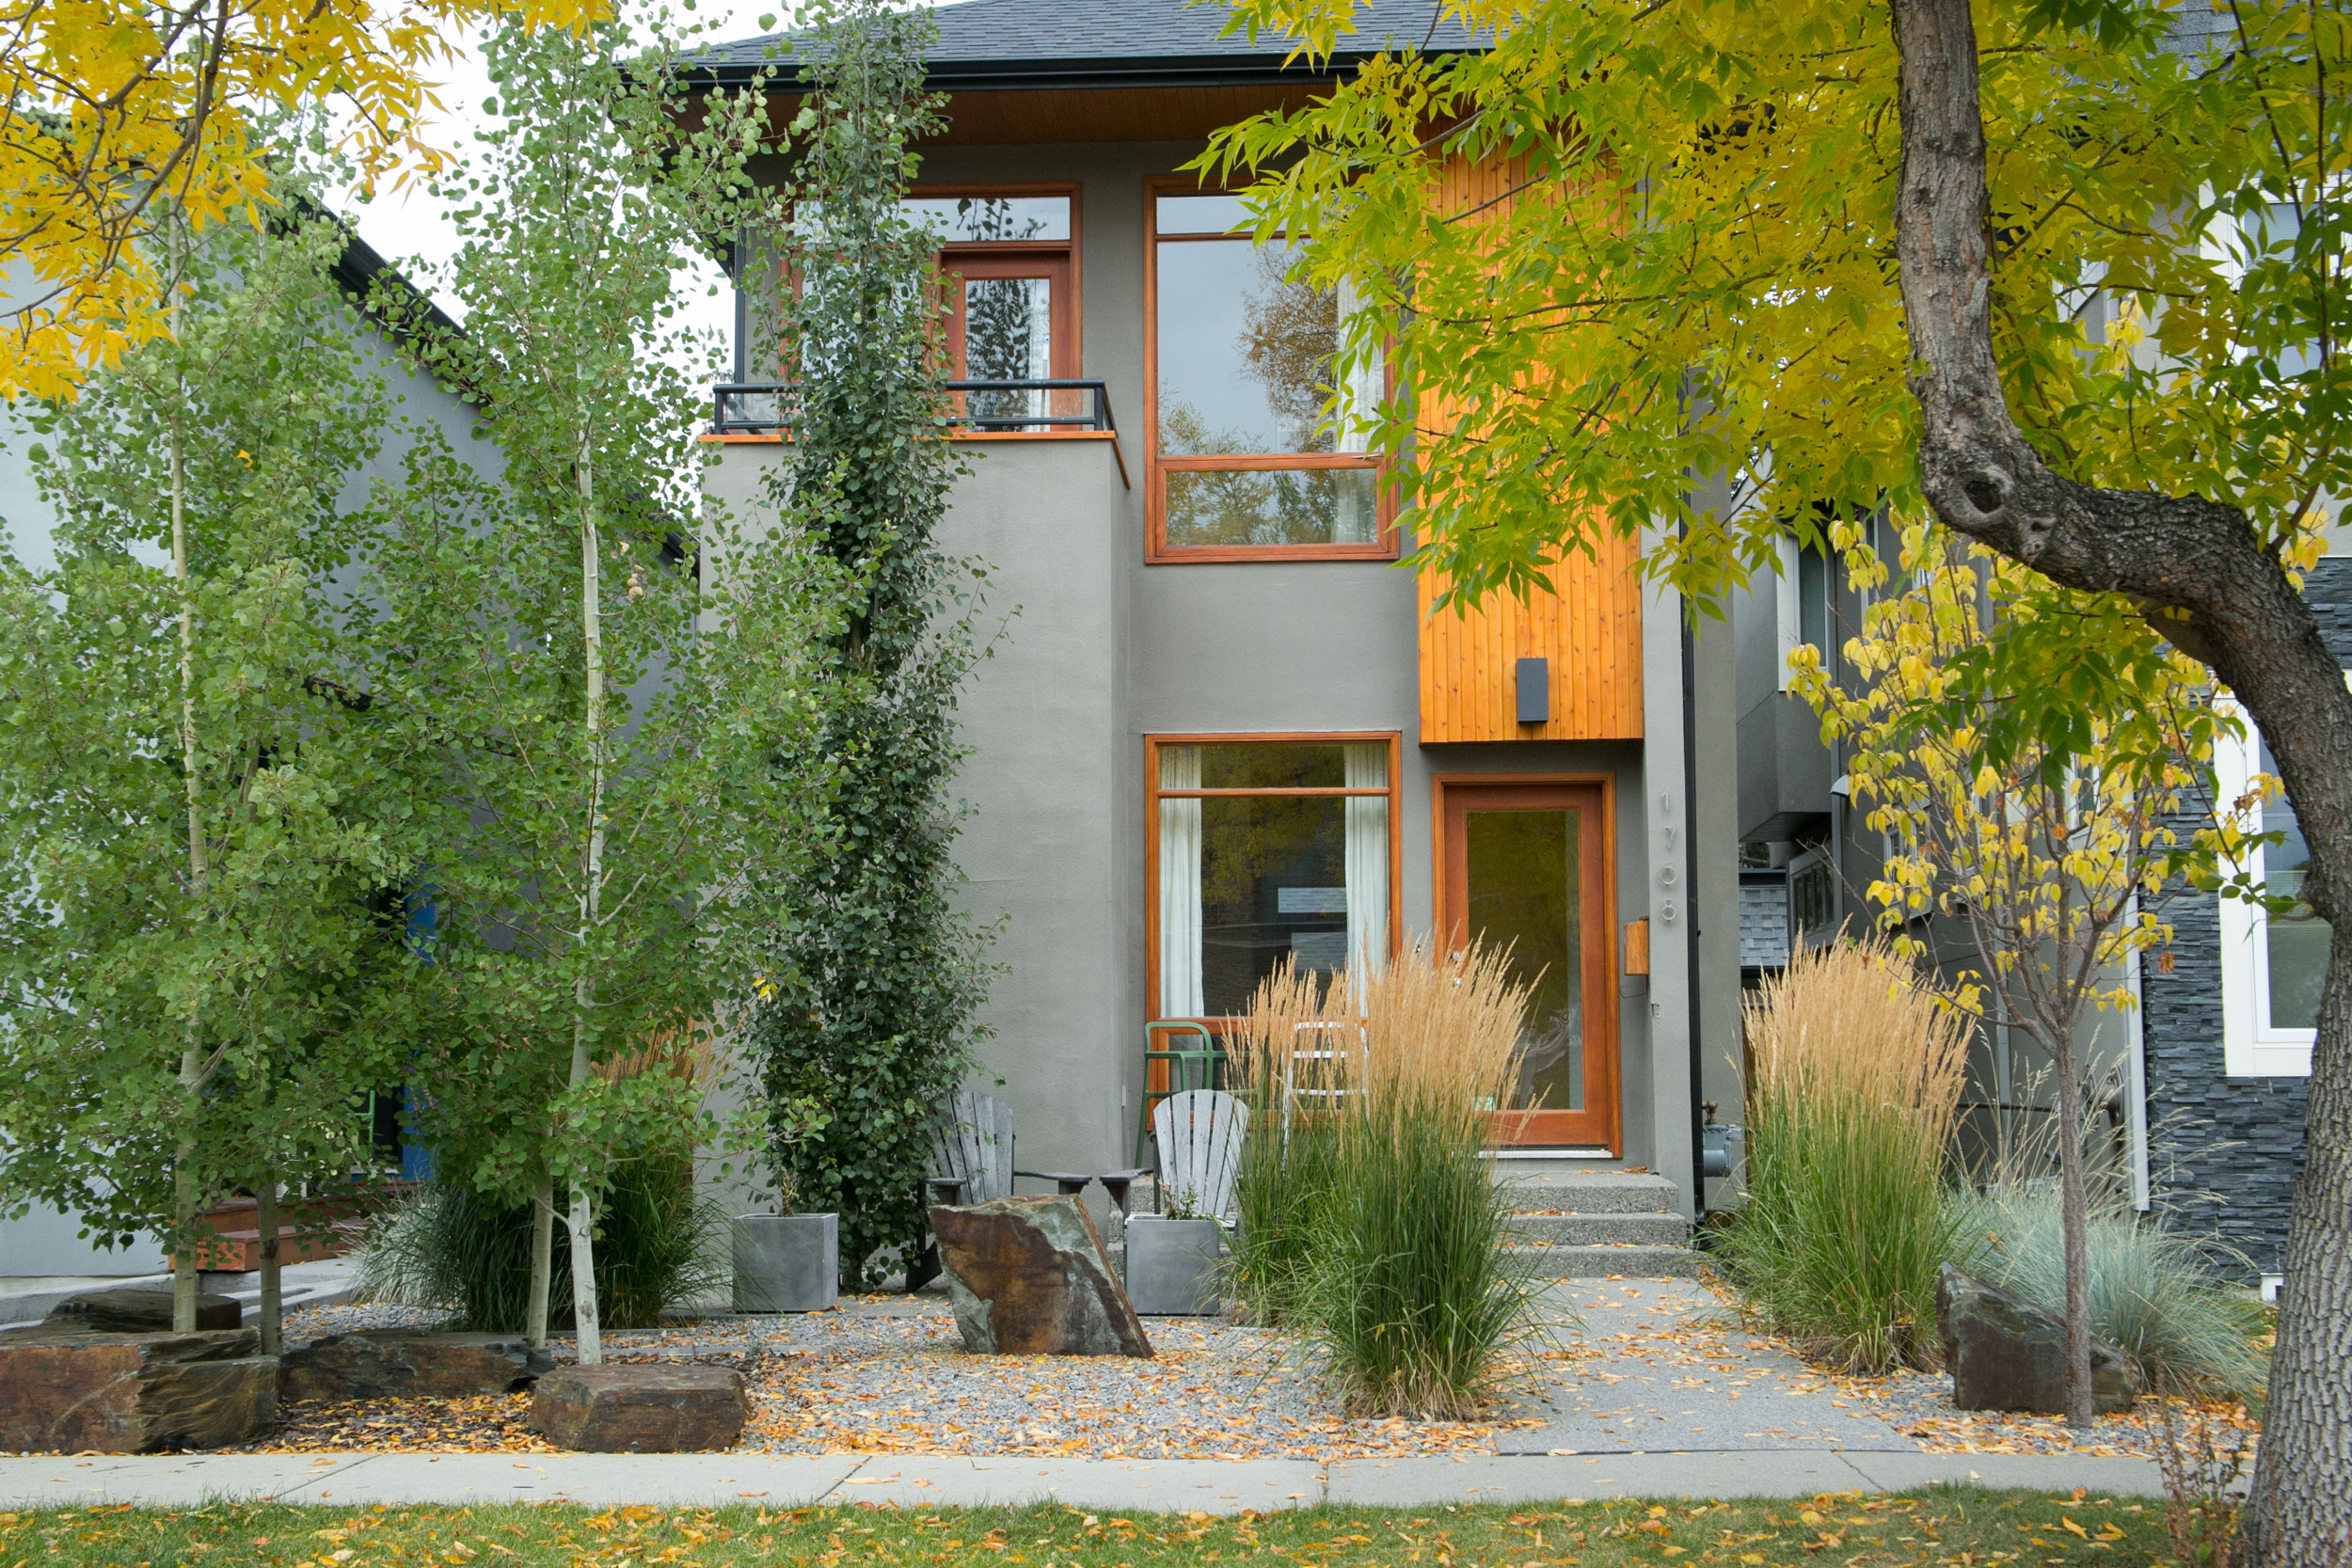  Xerascaped, small space, modern design — West Hillhurst, Calgary. 